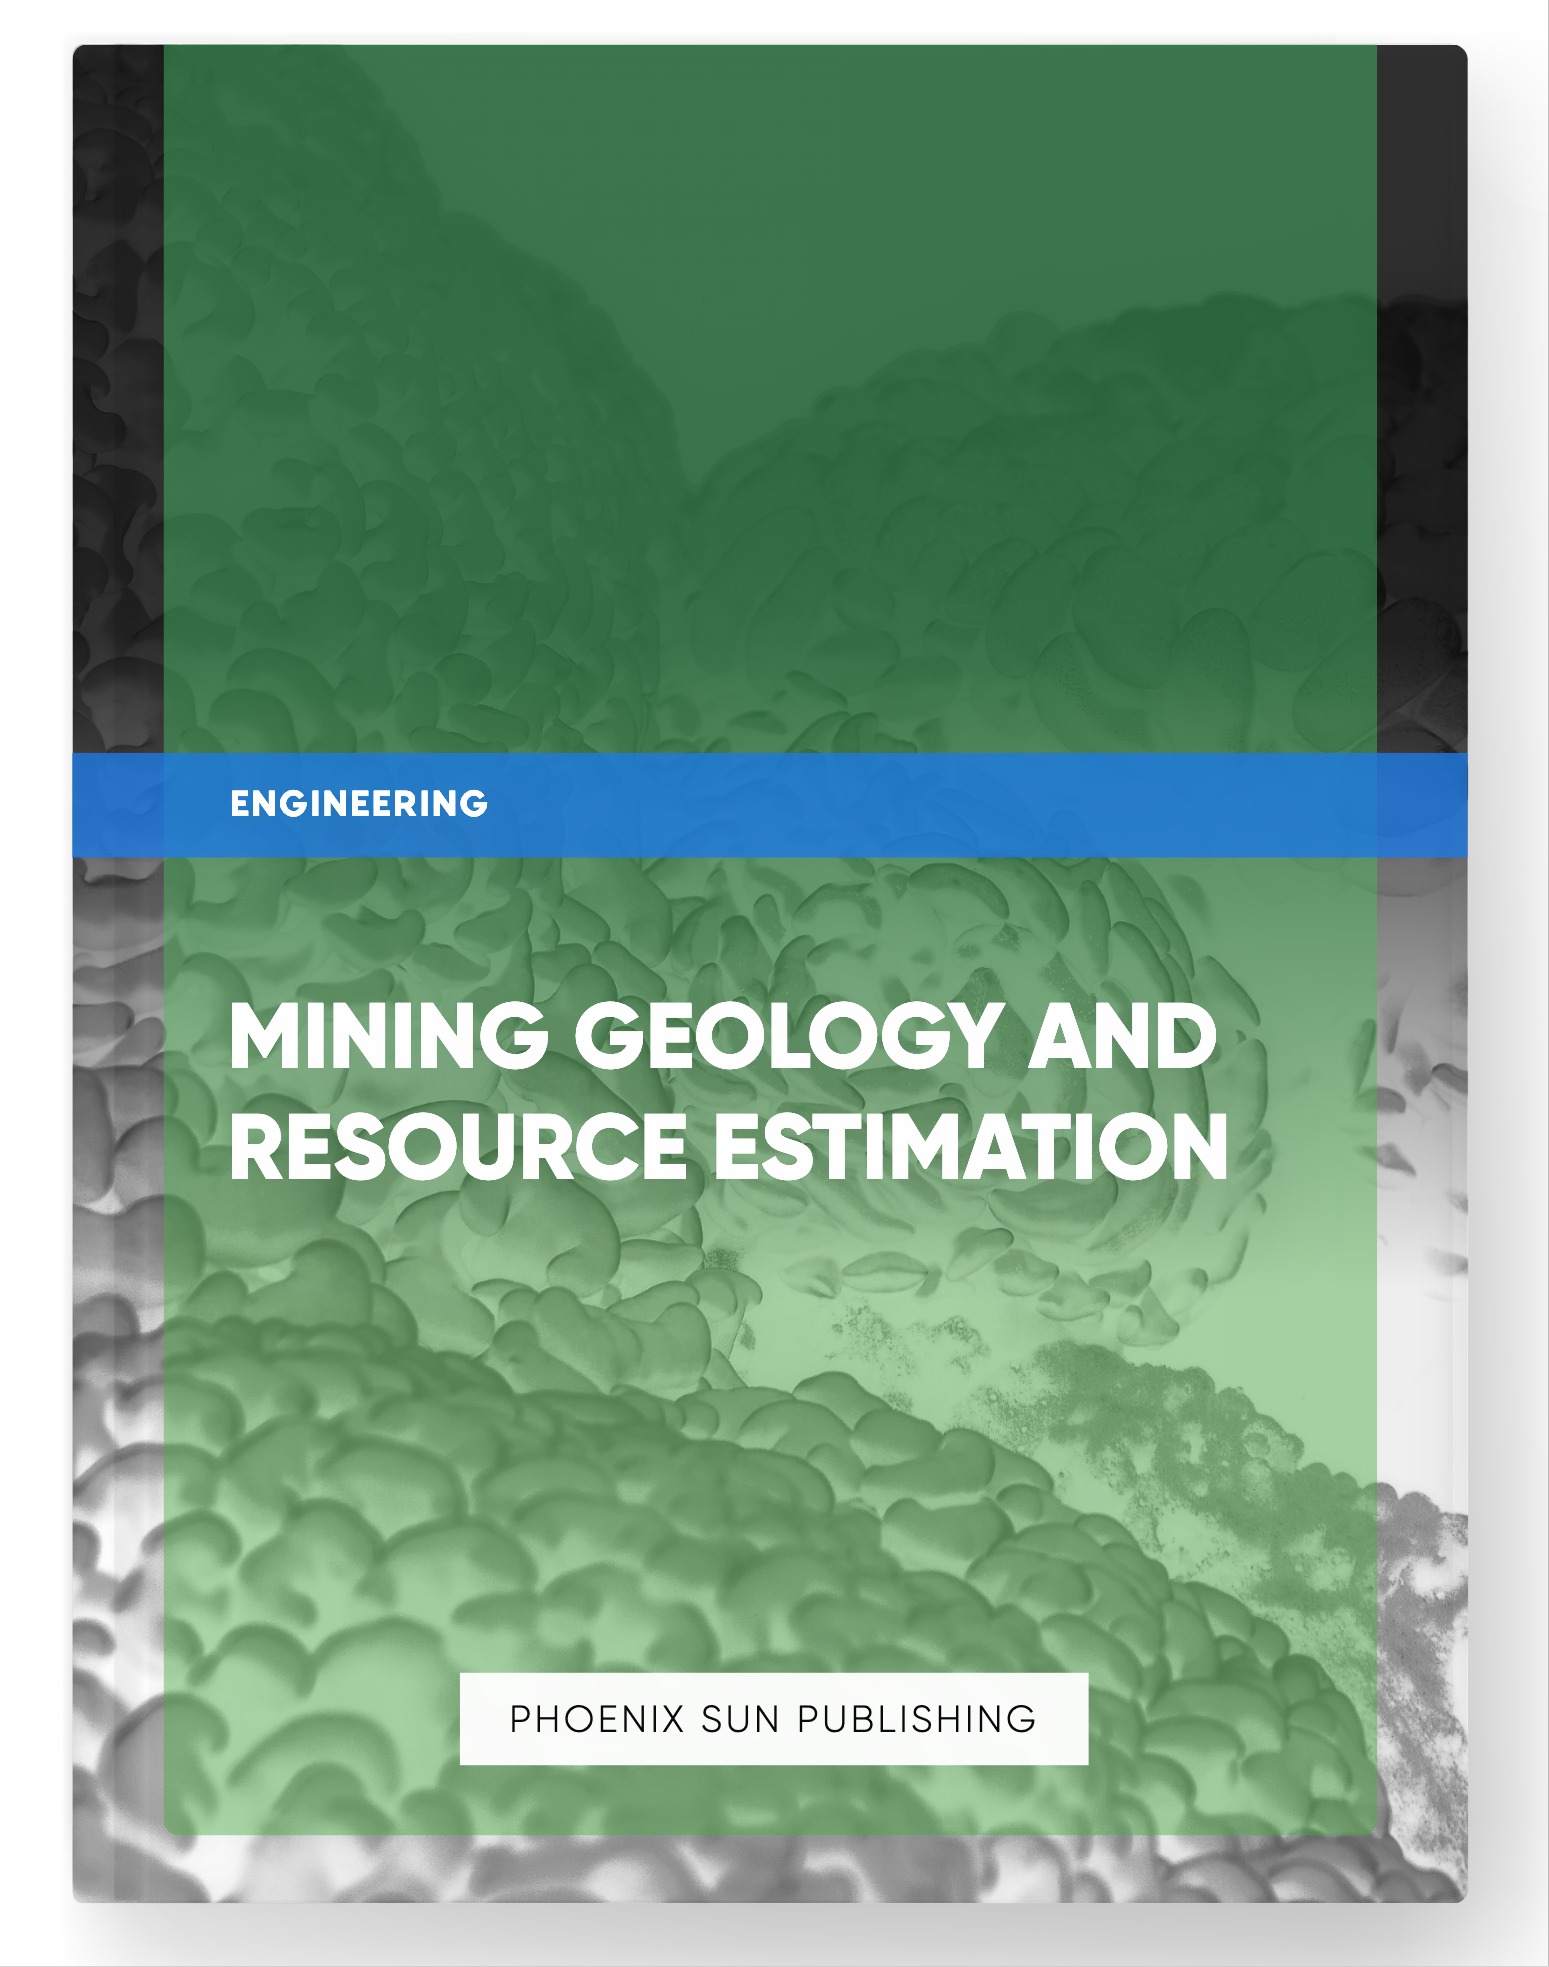 Mining Geology and Resource Estimation